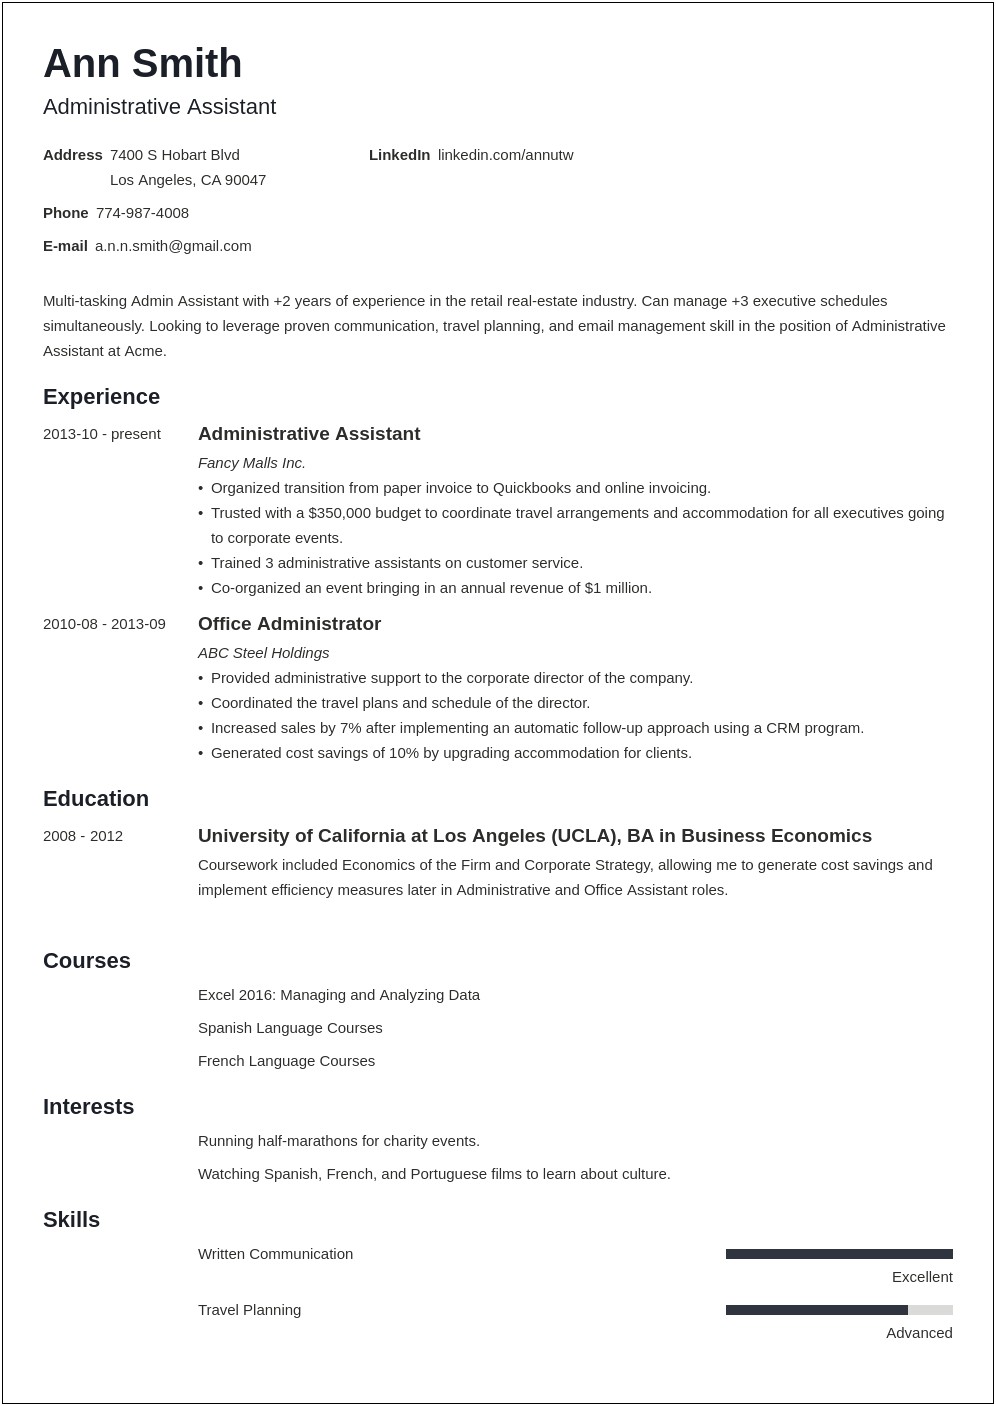 Resume Samples For Administrative Assistant Free